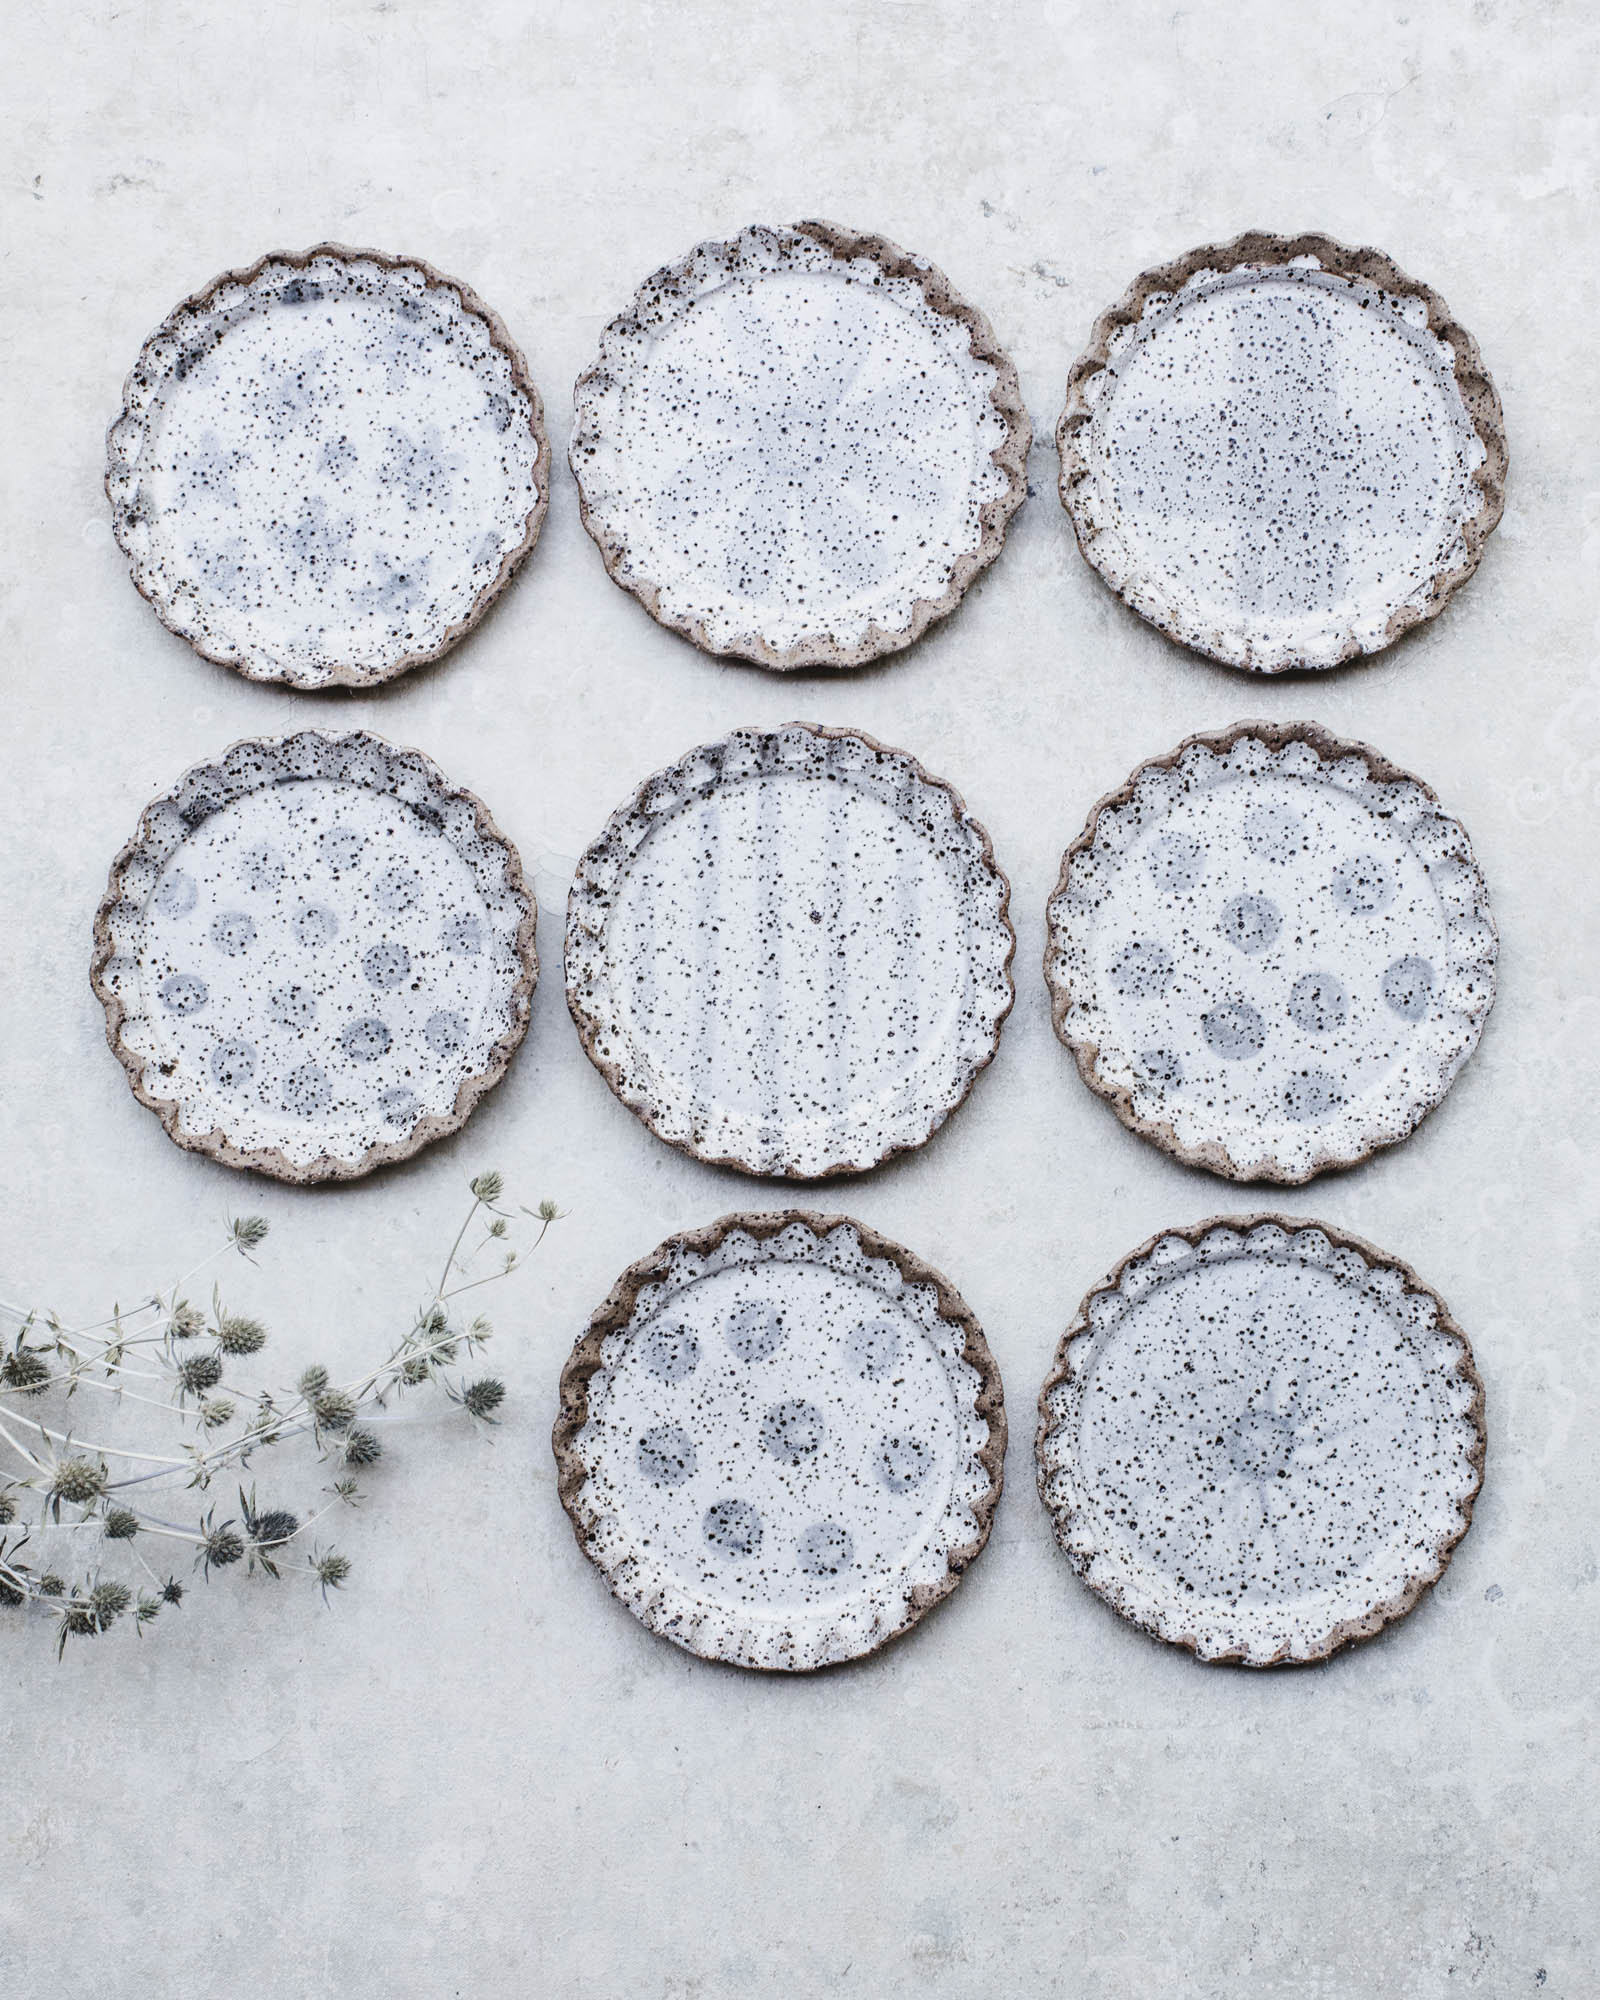 Handmade rustic speckled patterned plate with scalloped rims by clay beehive ceramics